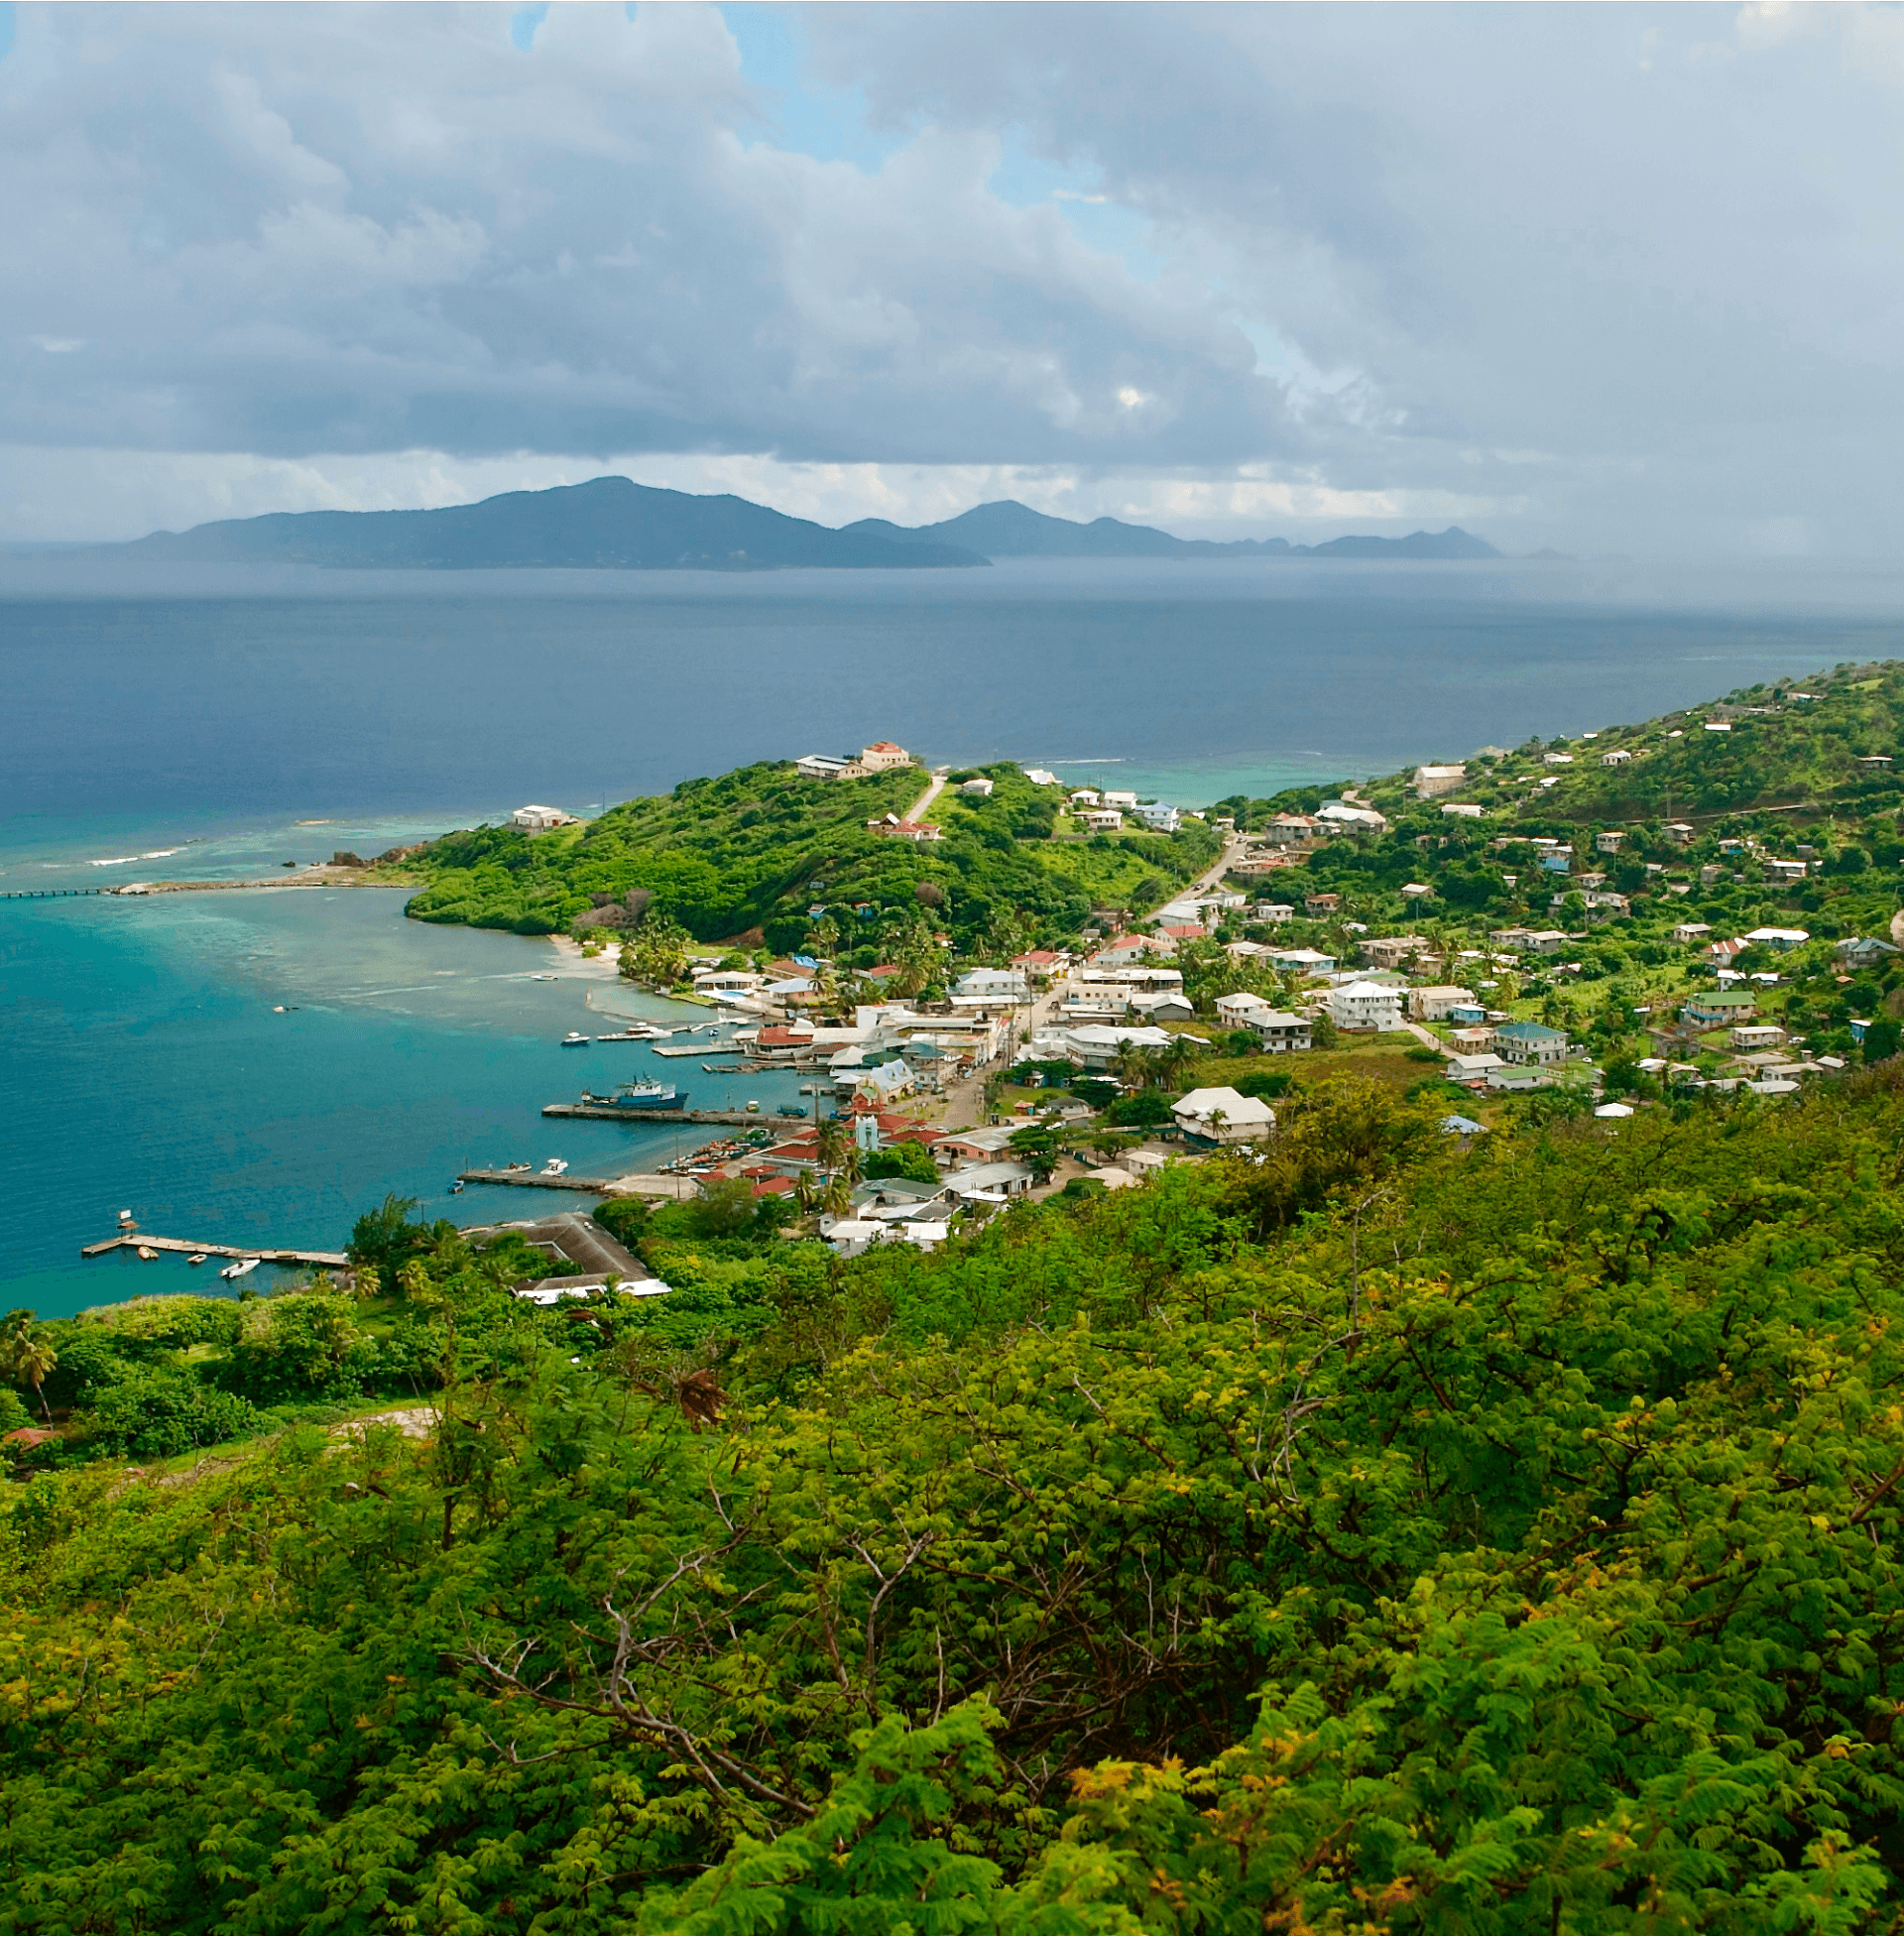 St. Vincent & the Grenadines mountain side